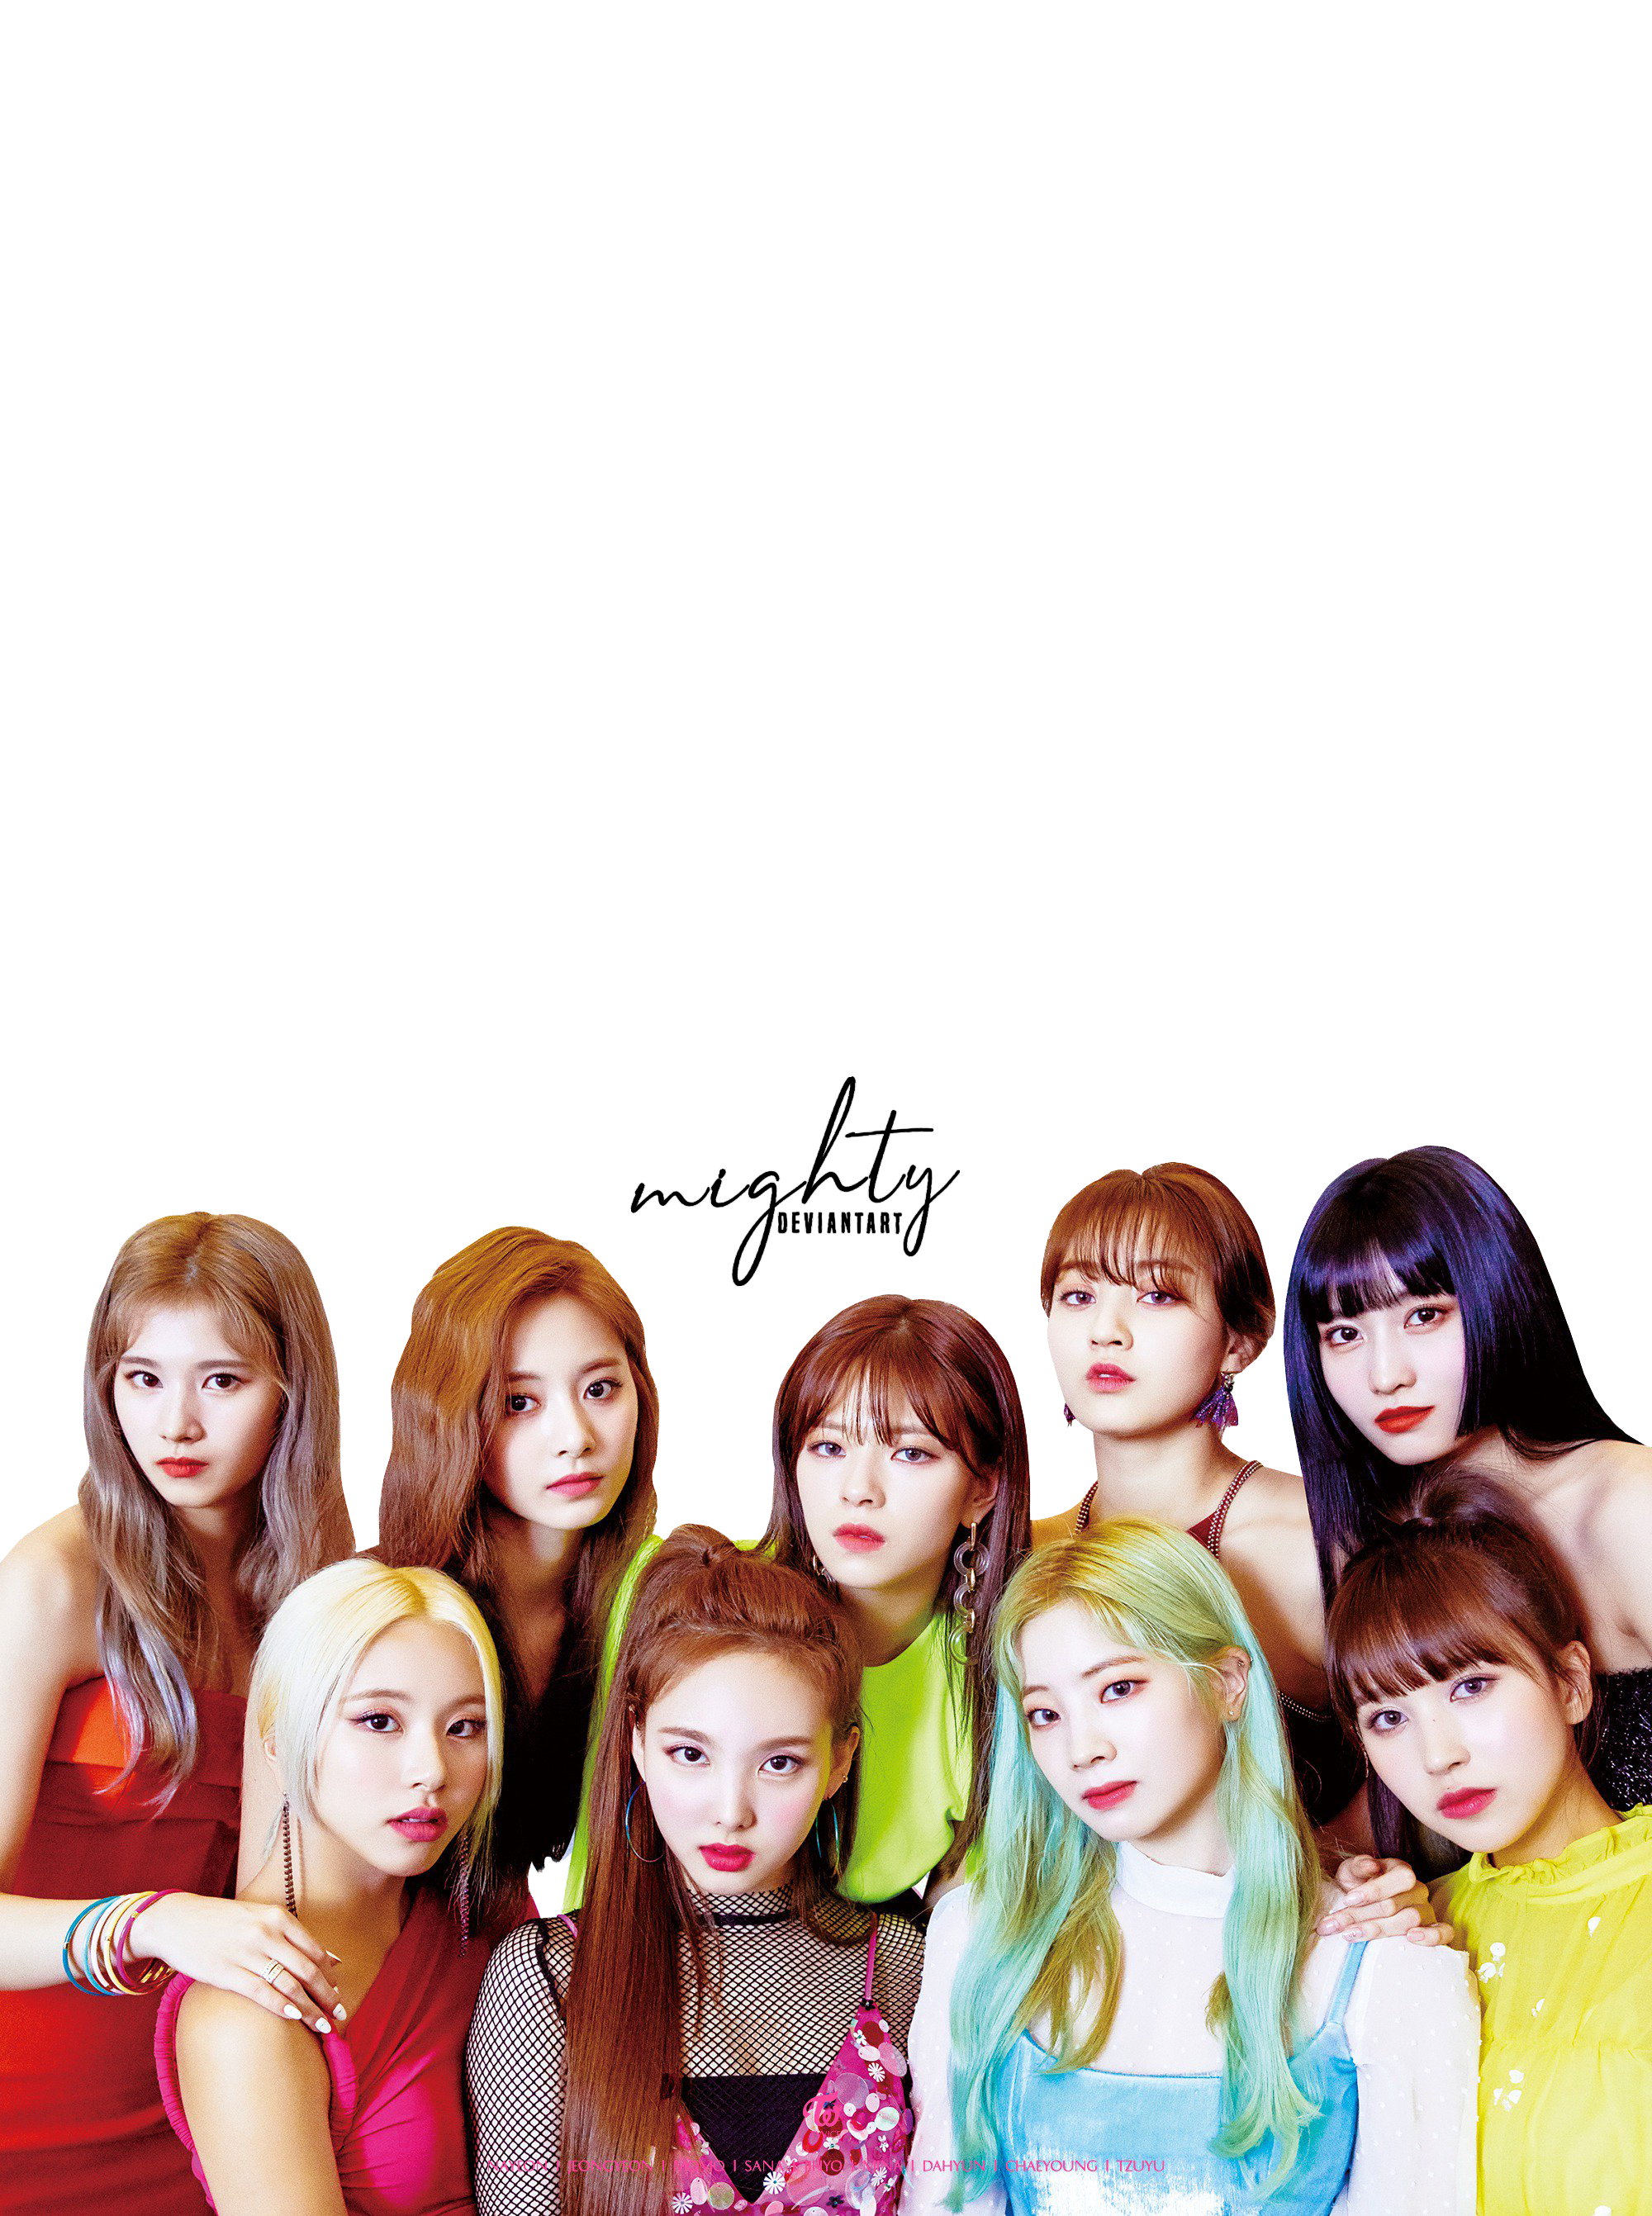 Download PNG image - TWICE Transparent Background 